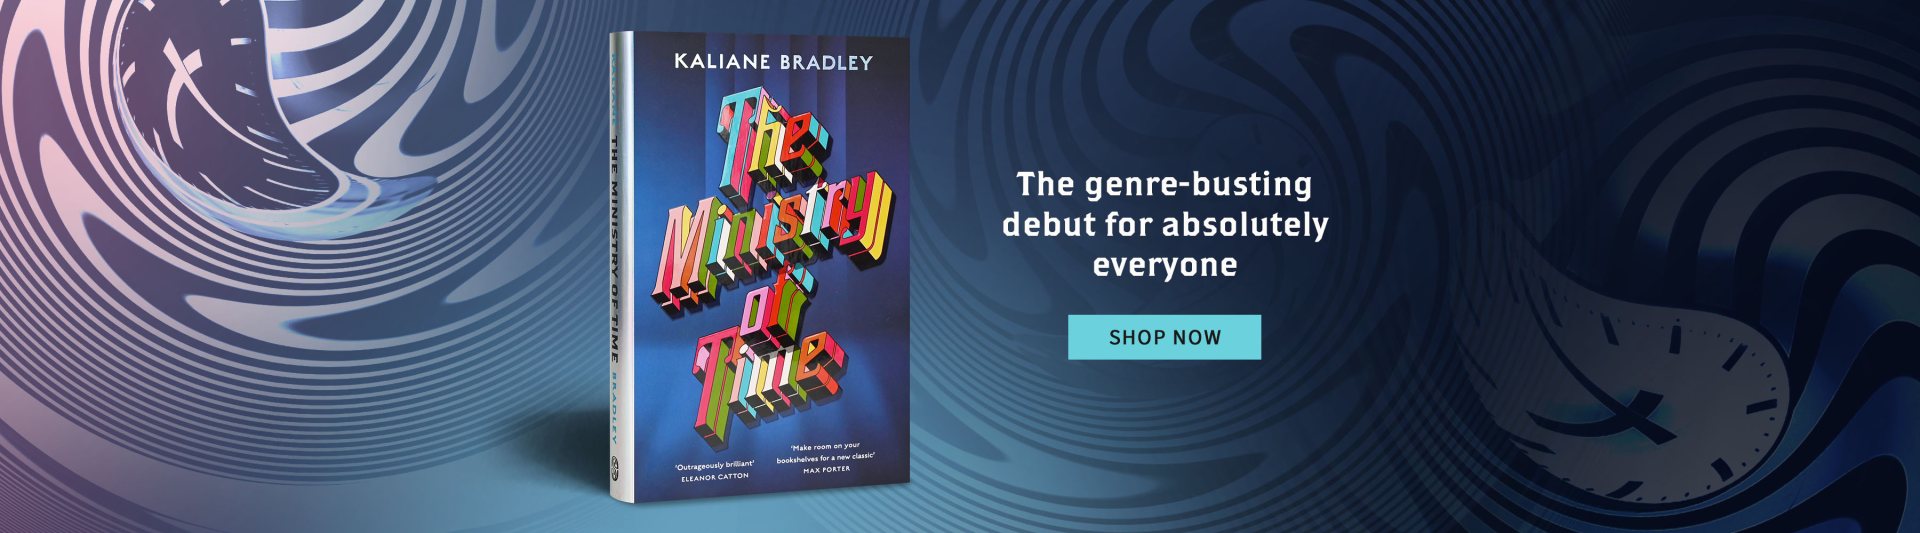 The Ministry of Time by Kaliane Bradley | SHOP NOW